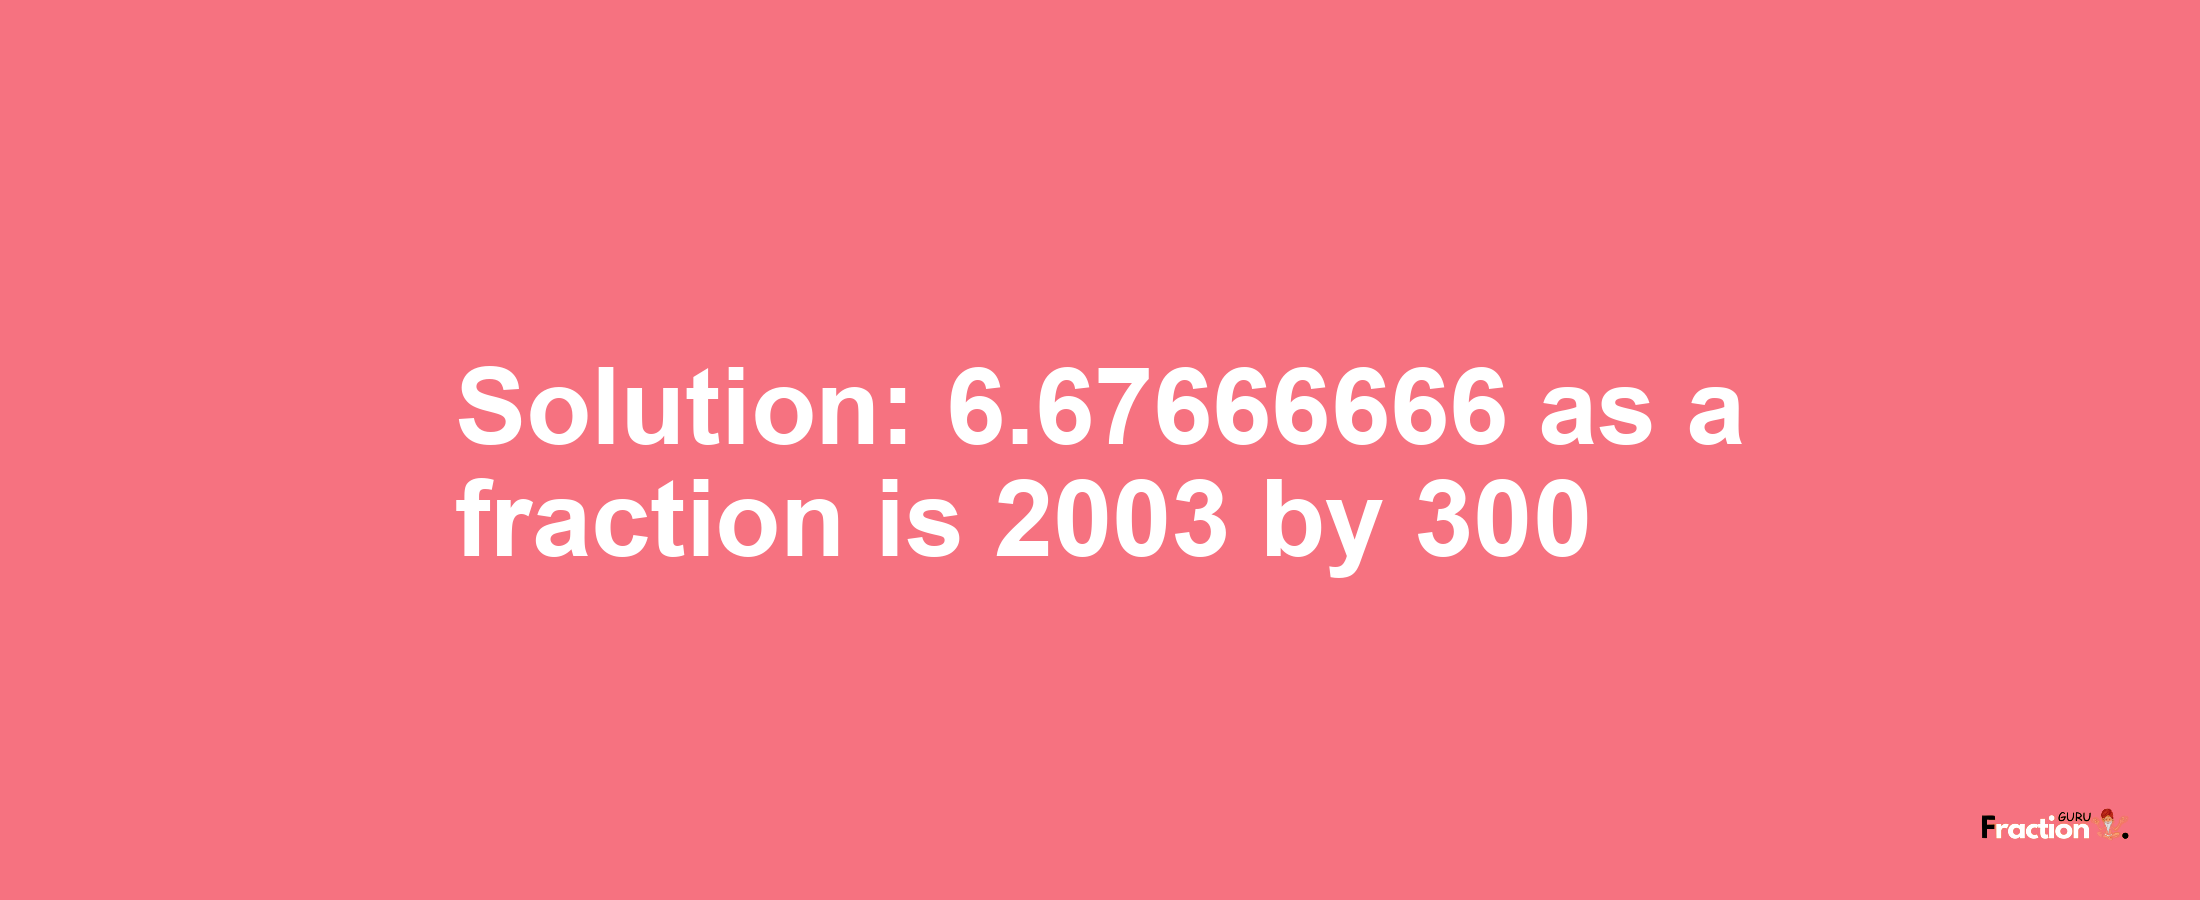 Solution:6.67666666 as a fraction is 2003/300